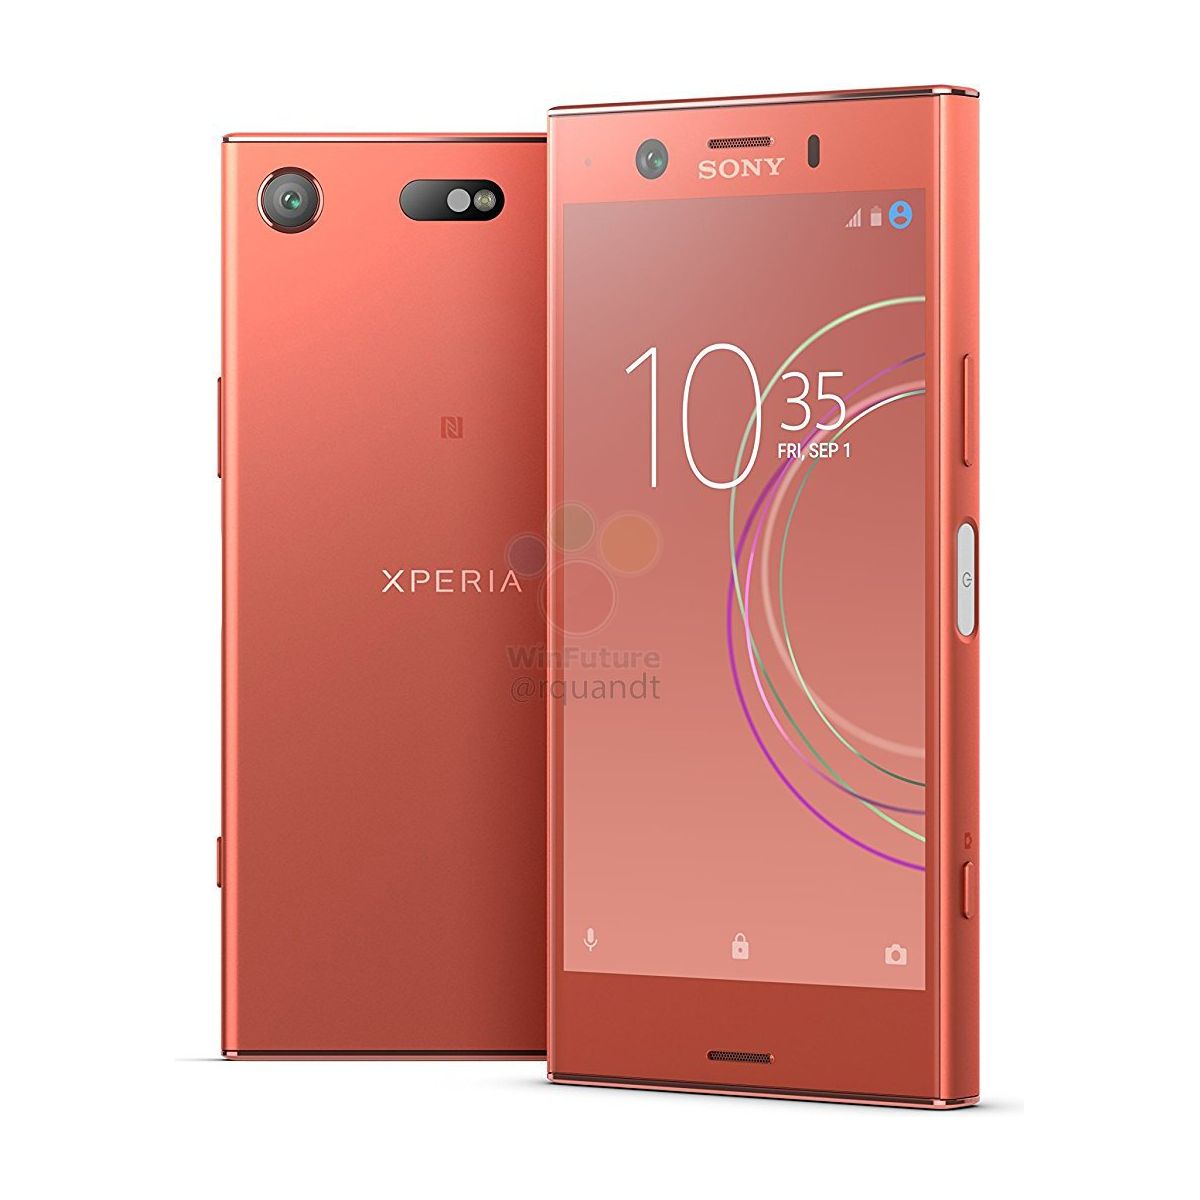 Sony Xperia XZ1 Compact - 32 GB - pink - Unlocked - GSM